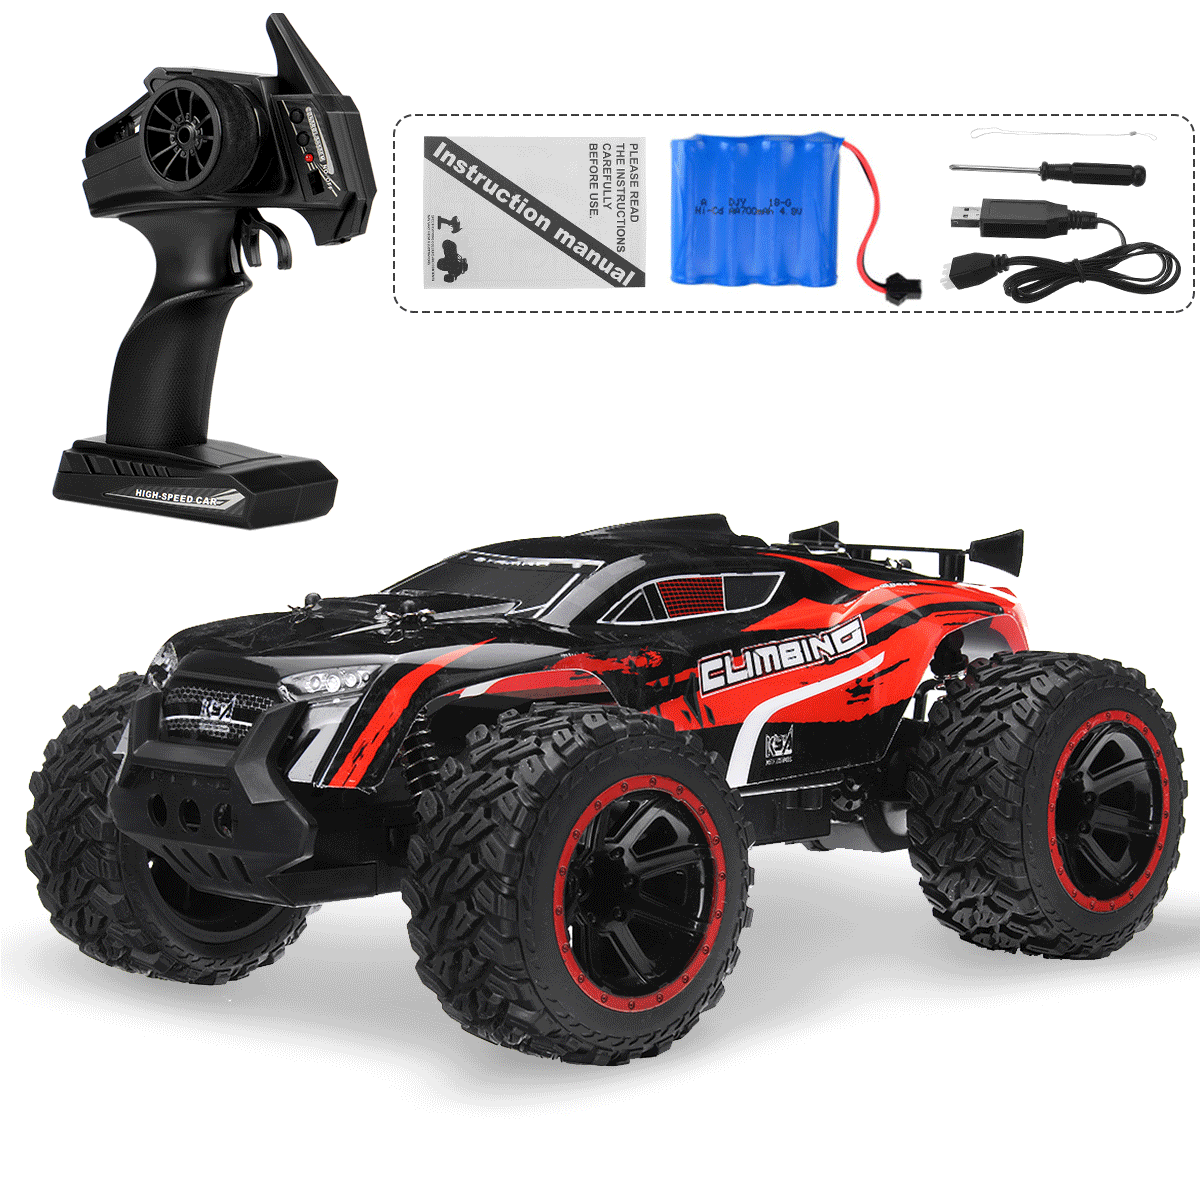 Toys RC Car 2 in 1 Radio Remote Control Cars w/ USB Red Racing Car Toy For Kids 